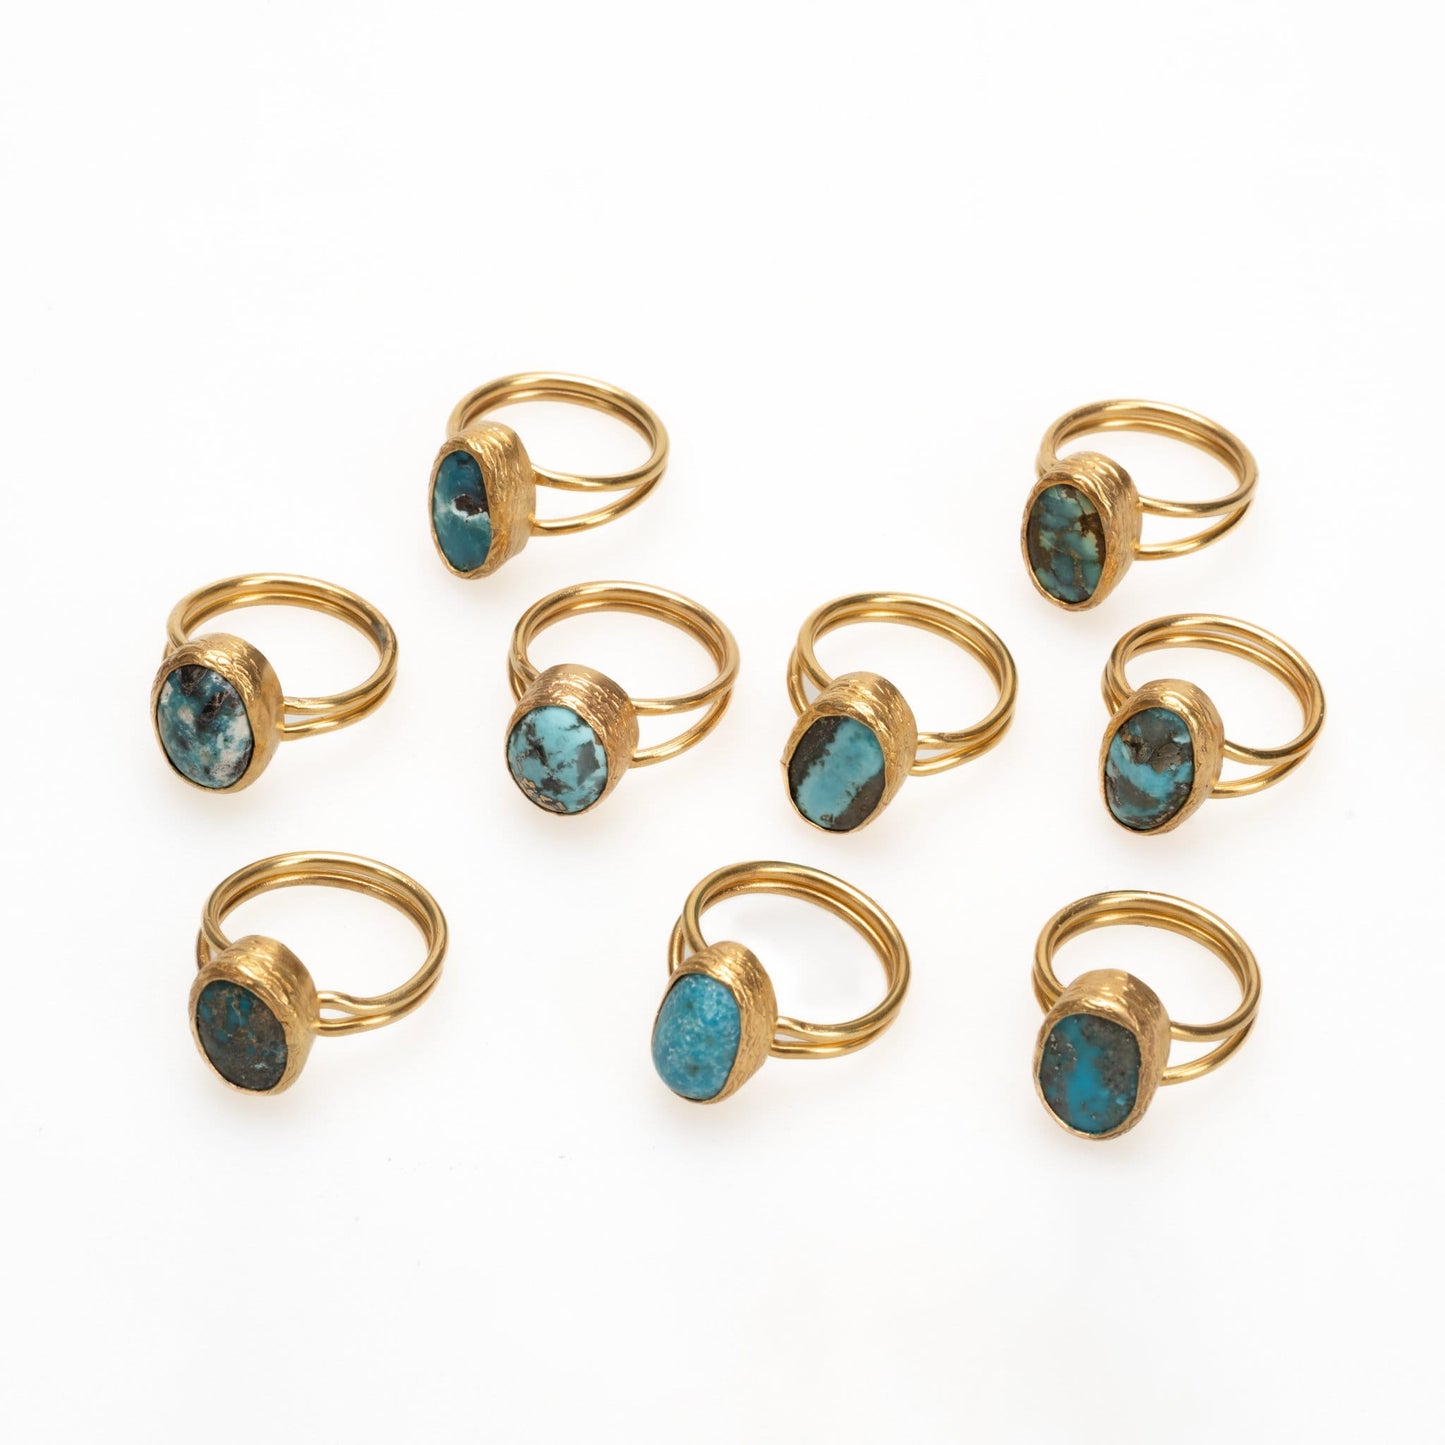 Adjustable Gold Ring with Turquoise Stone